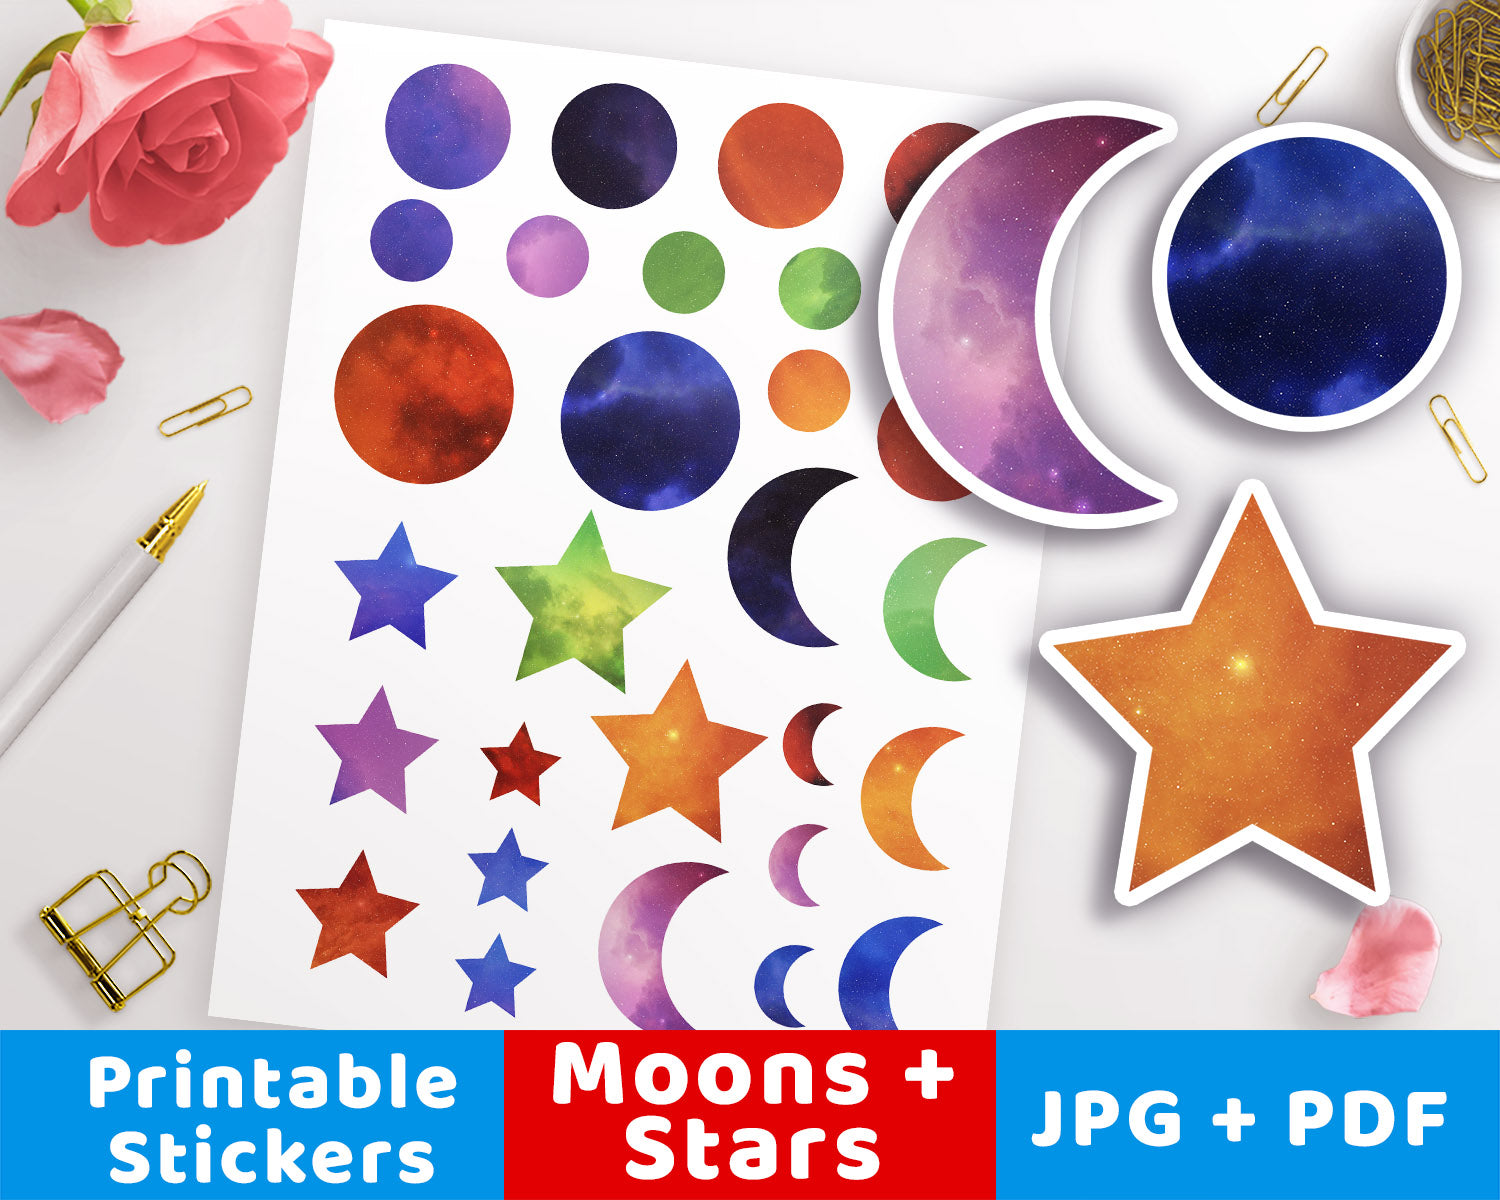 Moon stickers - Planet stickers - Star planner stickers – My Sweet Paper  Card